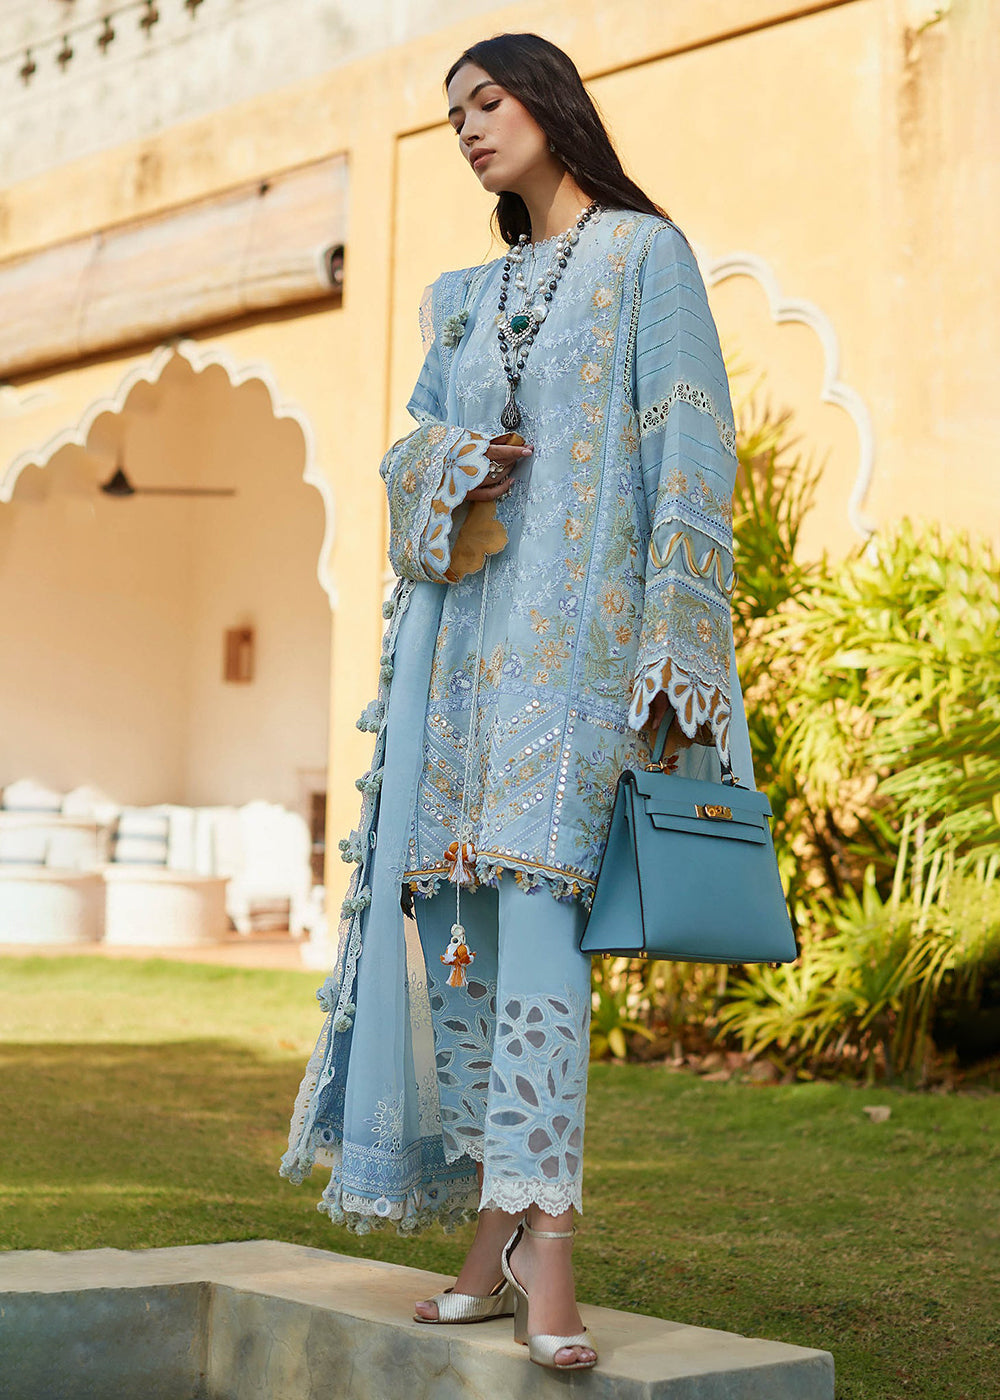 Buy Now Ice Blue Lawn Suit - Elan - Luxury Lawn '23 - IRA-EL23-01A Online in USA, UK, Canada & Worldwide at Empress Clothing.